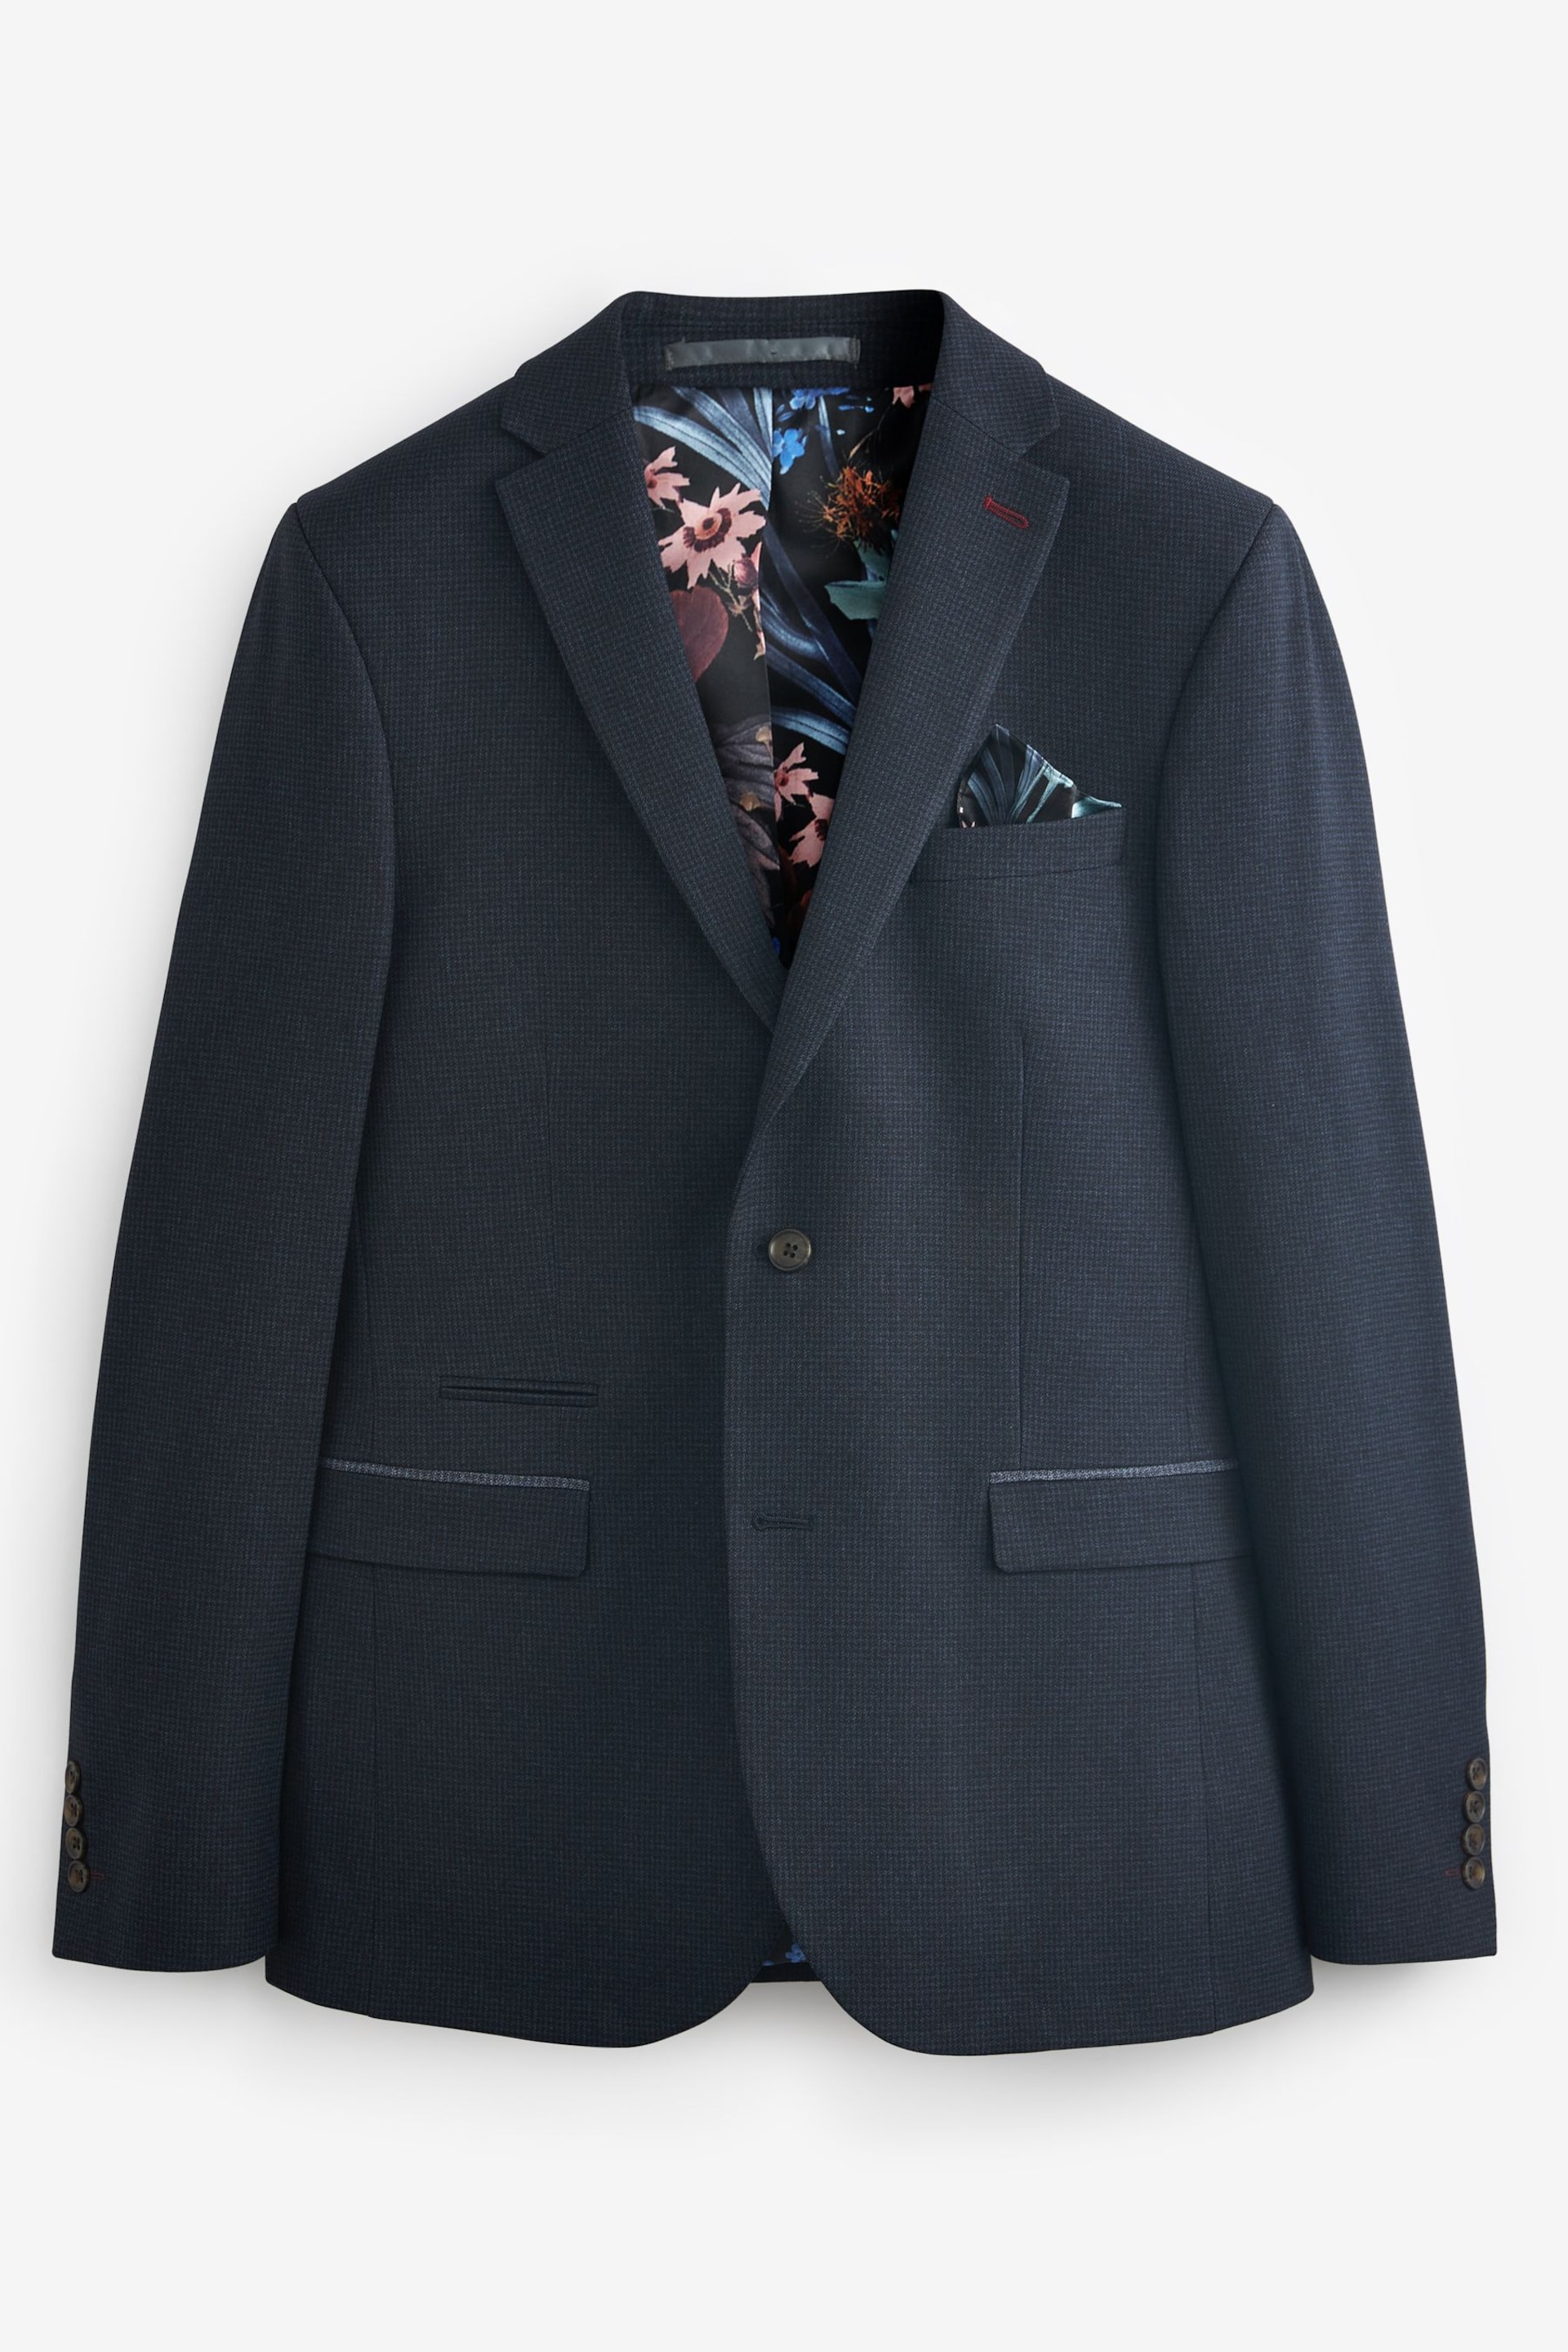 Navy Blue Slim Puppytooth Suit Jacket - Image 7 of 10